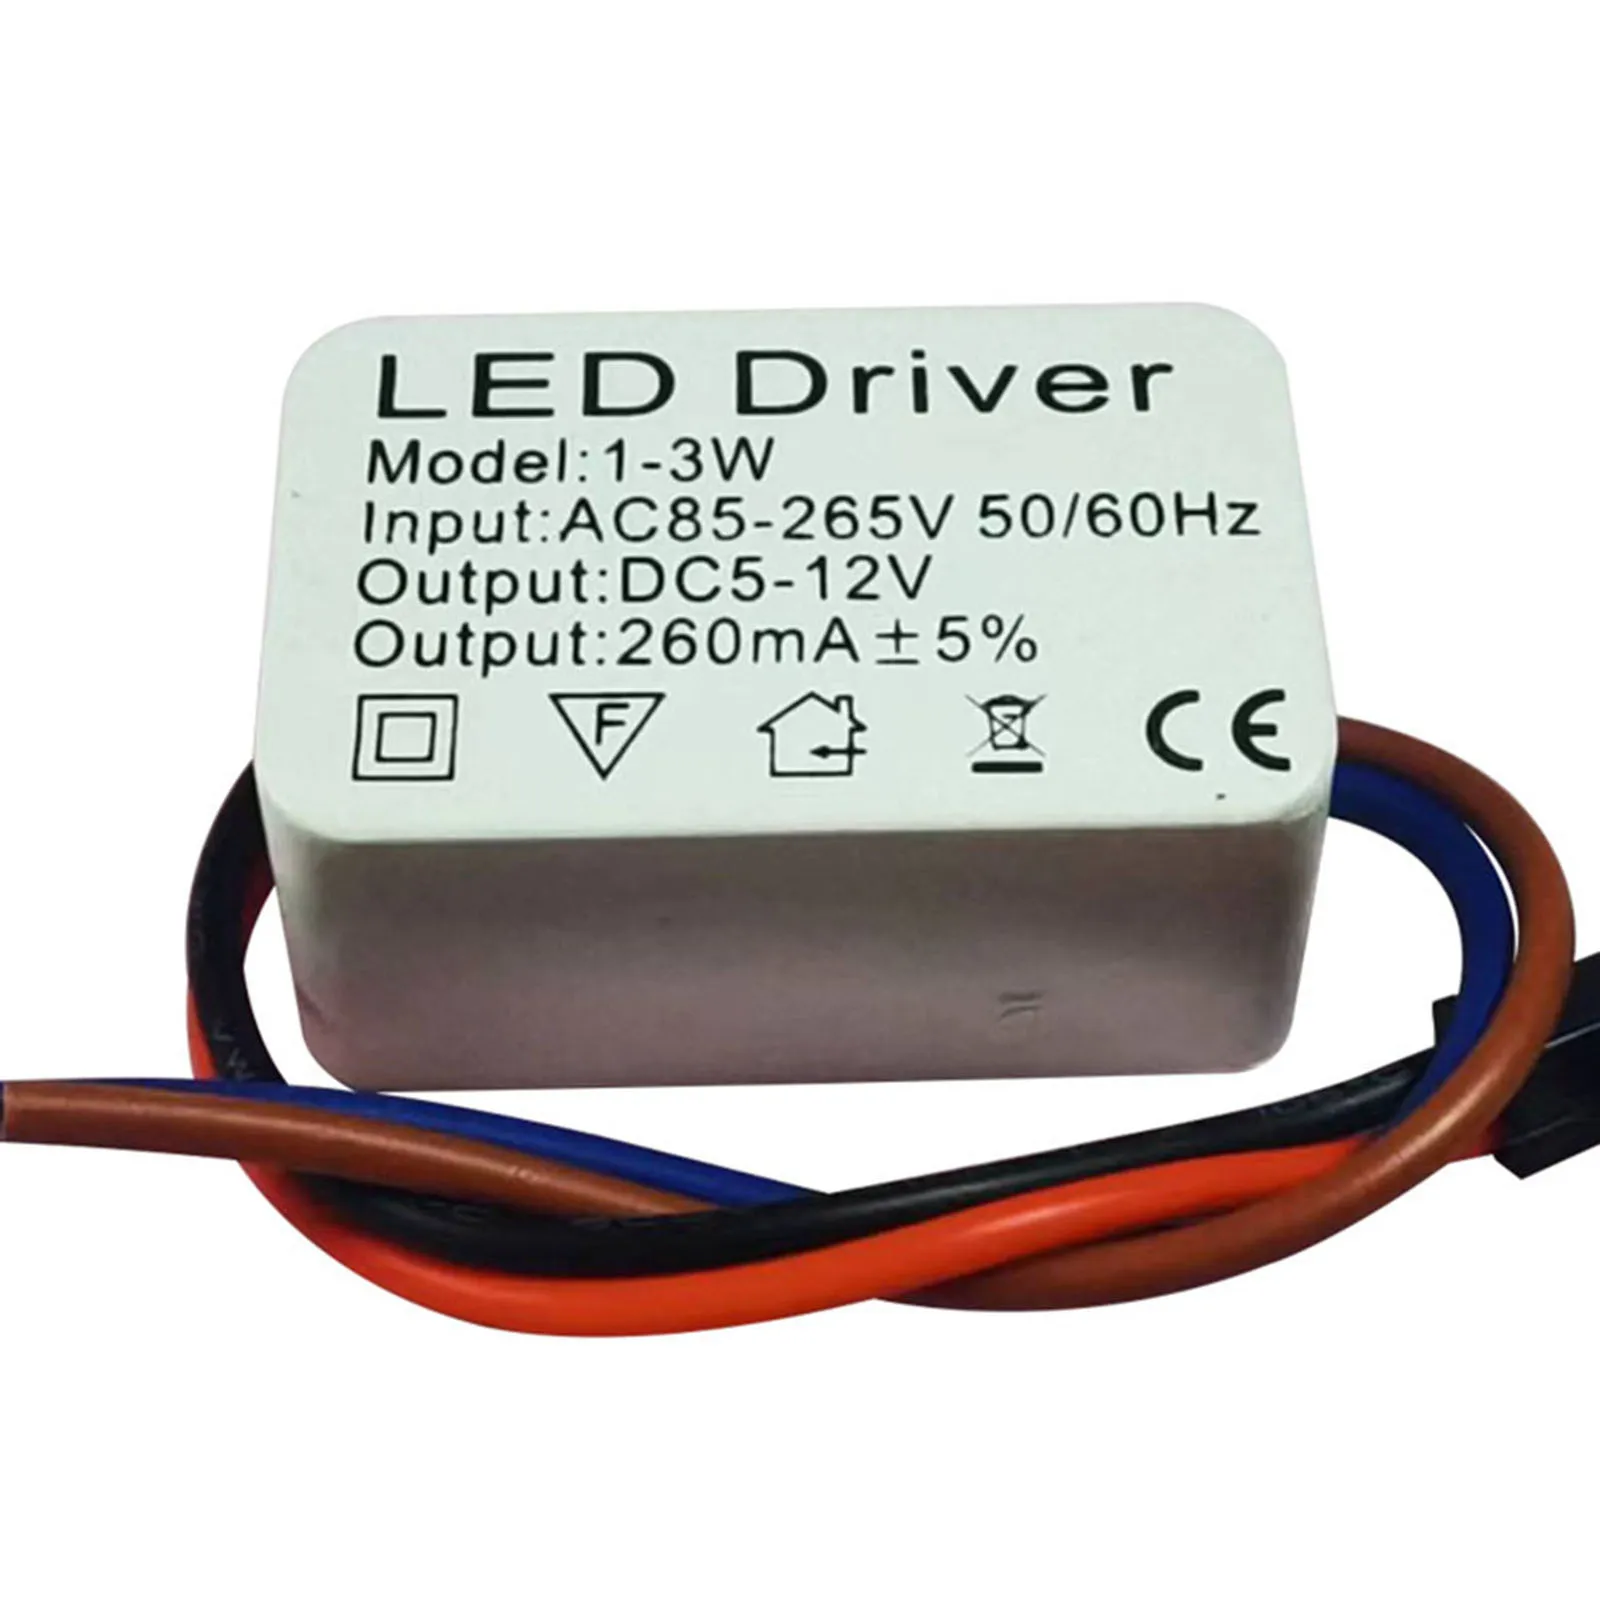 Stable LED Constant Current Driver Transformer Power Supply 260mA Wide Voltage Range Reliable and Safe Operation